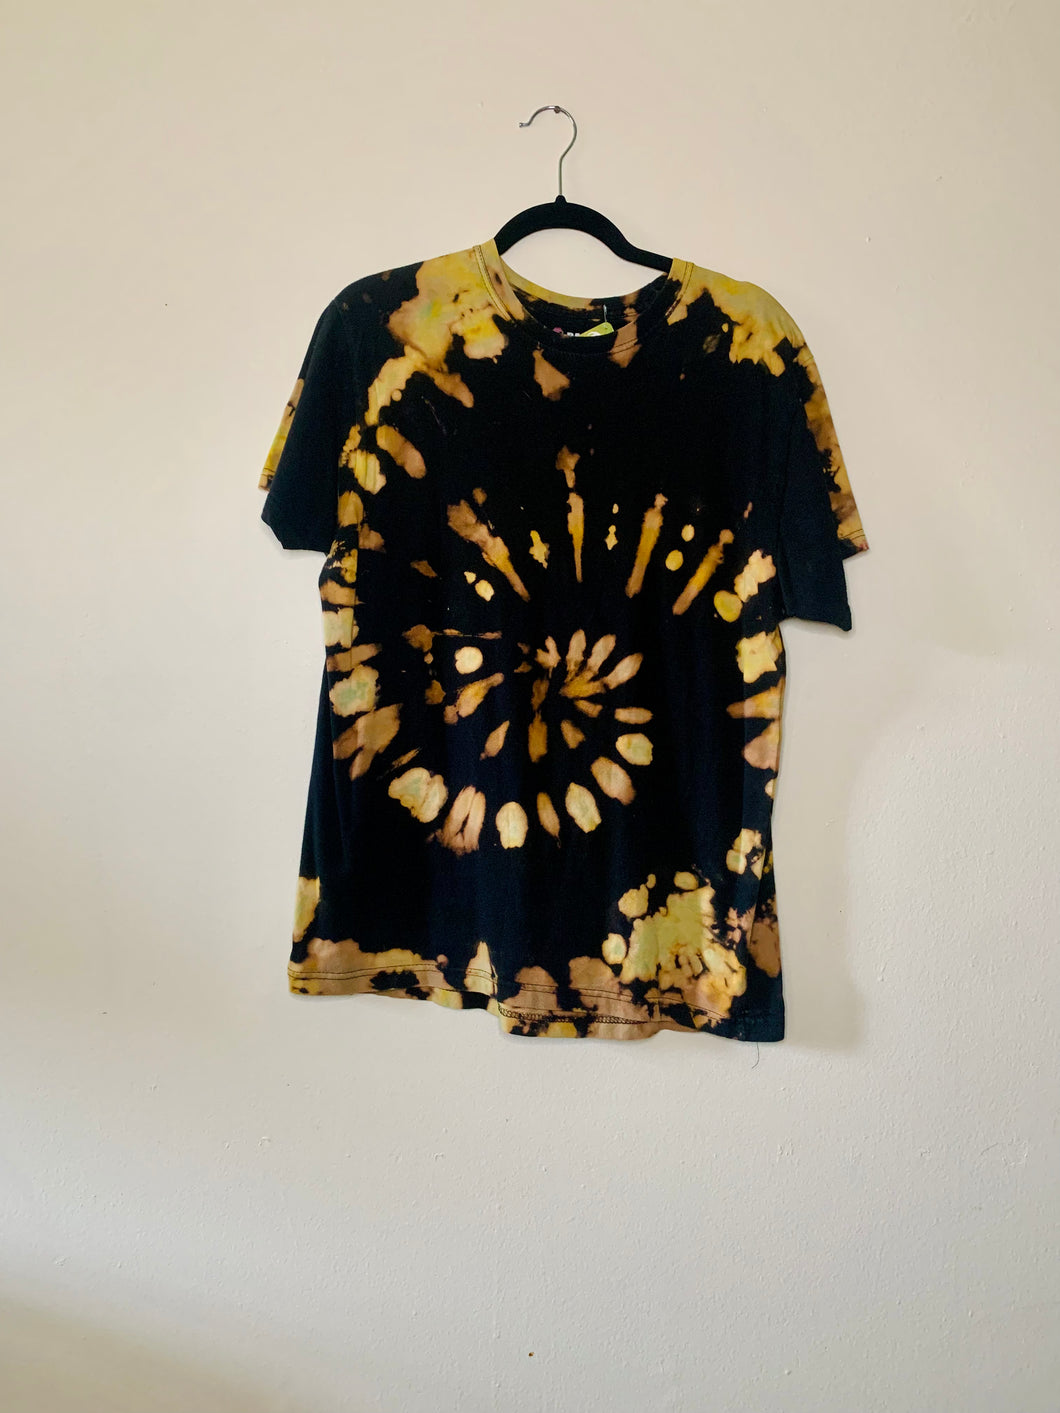 Hand Dyed T-shirt - Black and Yellow